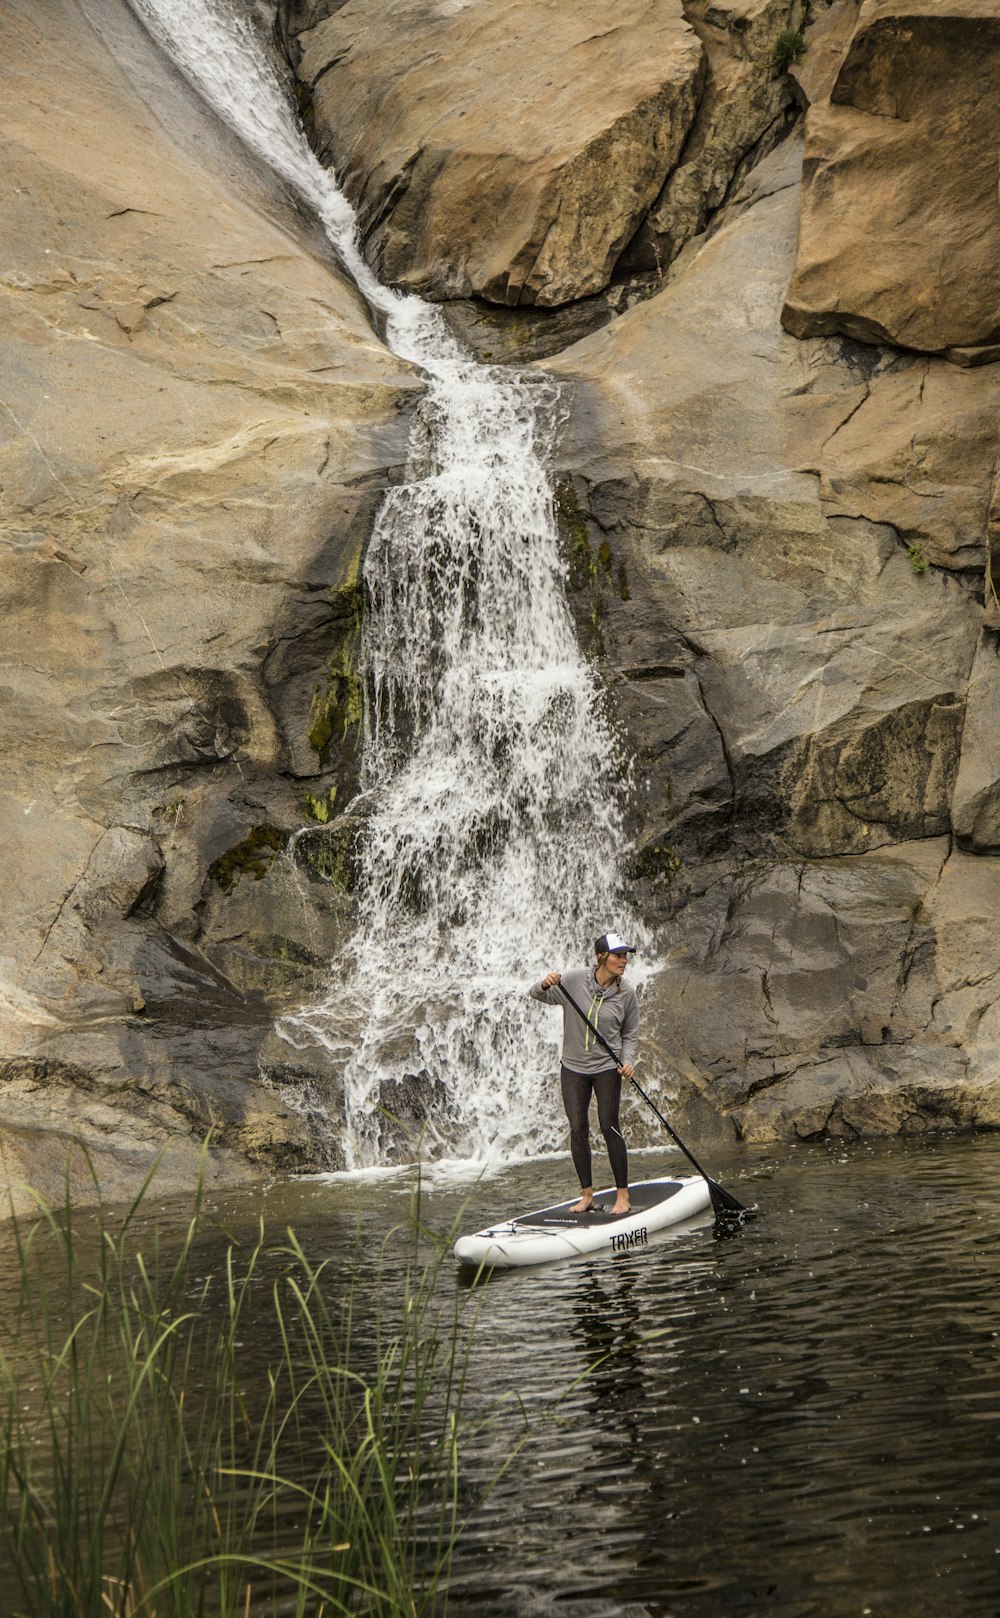 man in white and black wet suit riding white kayak on river during daytime